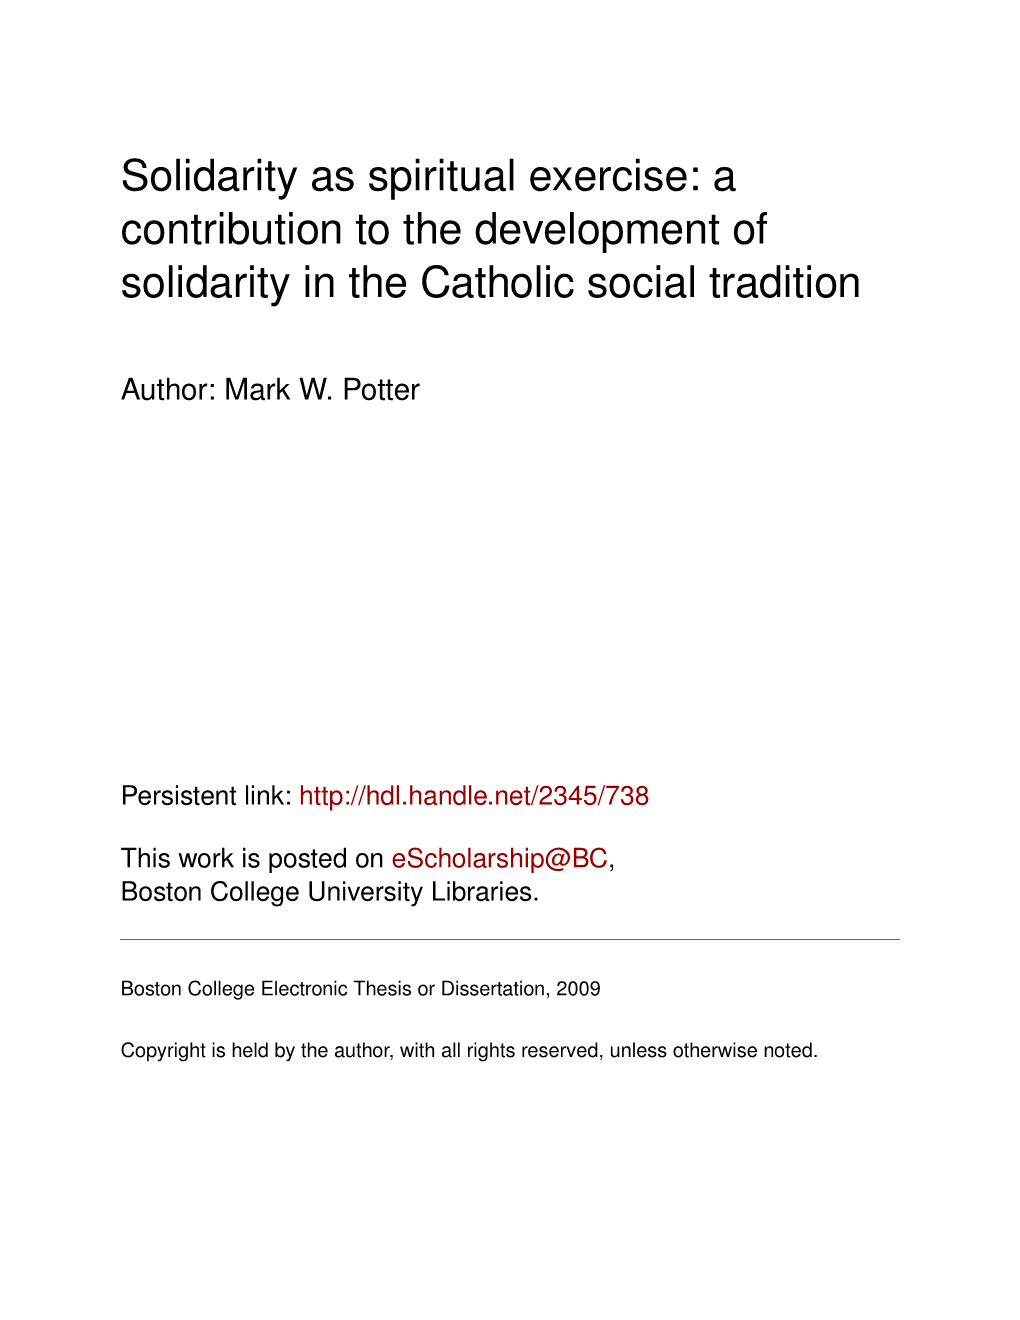 A Contribution to the Development of Solidarity in the Catholic Social Tradition